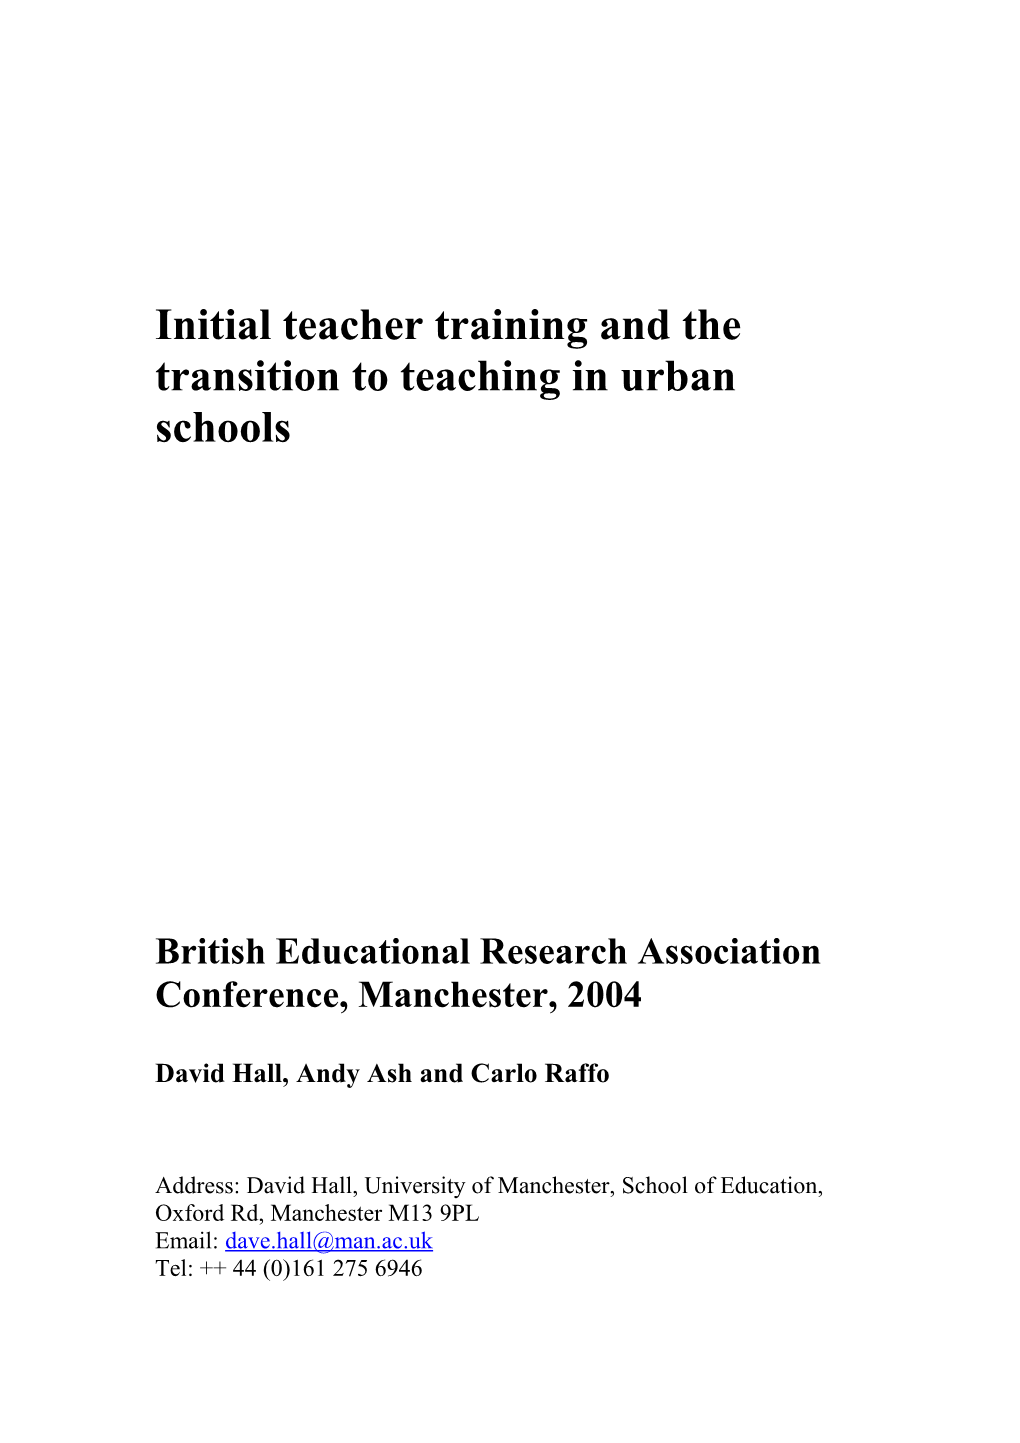 Initial Teacher Training and the Transition to Teaching in Urban Schools